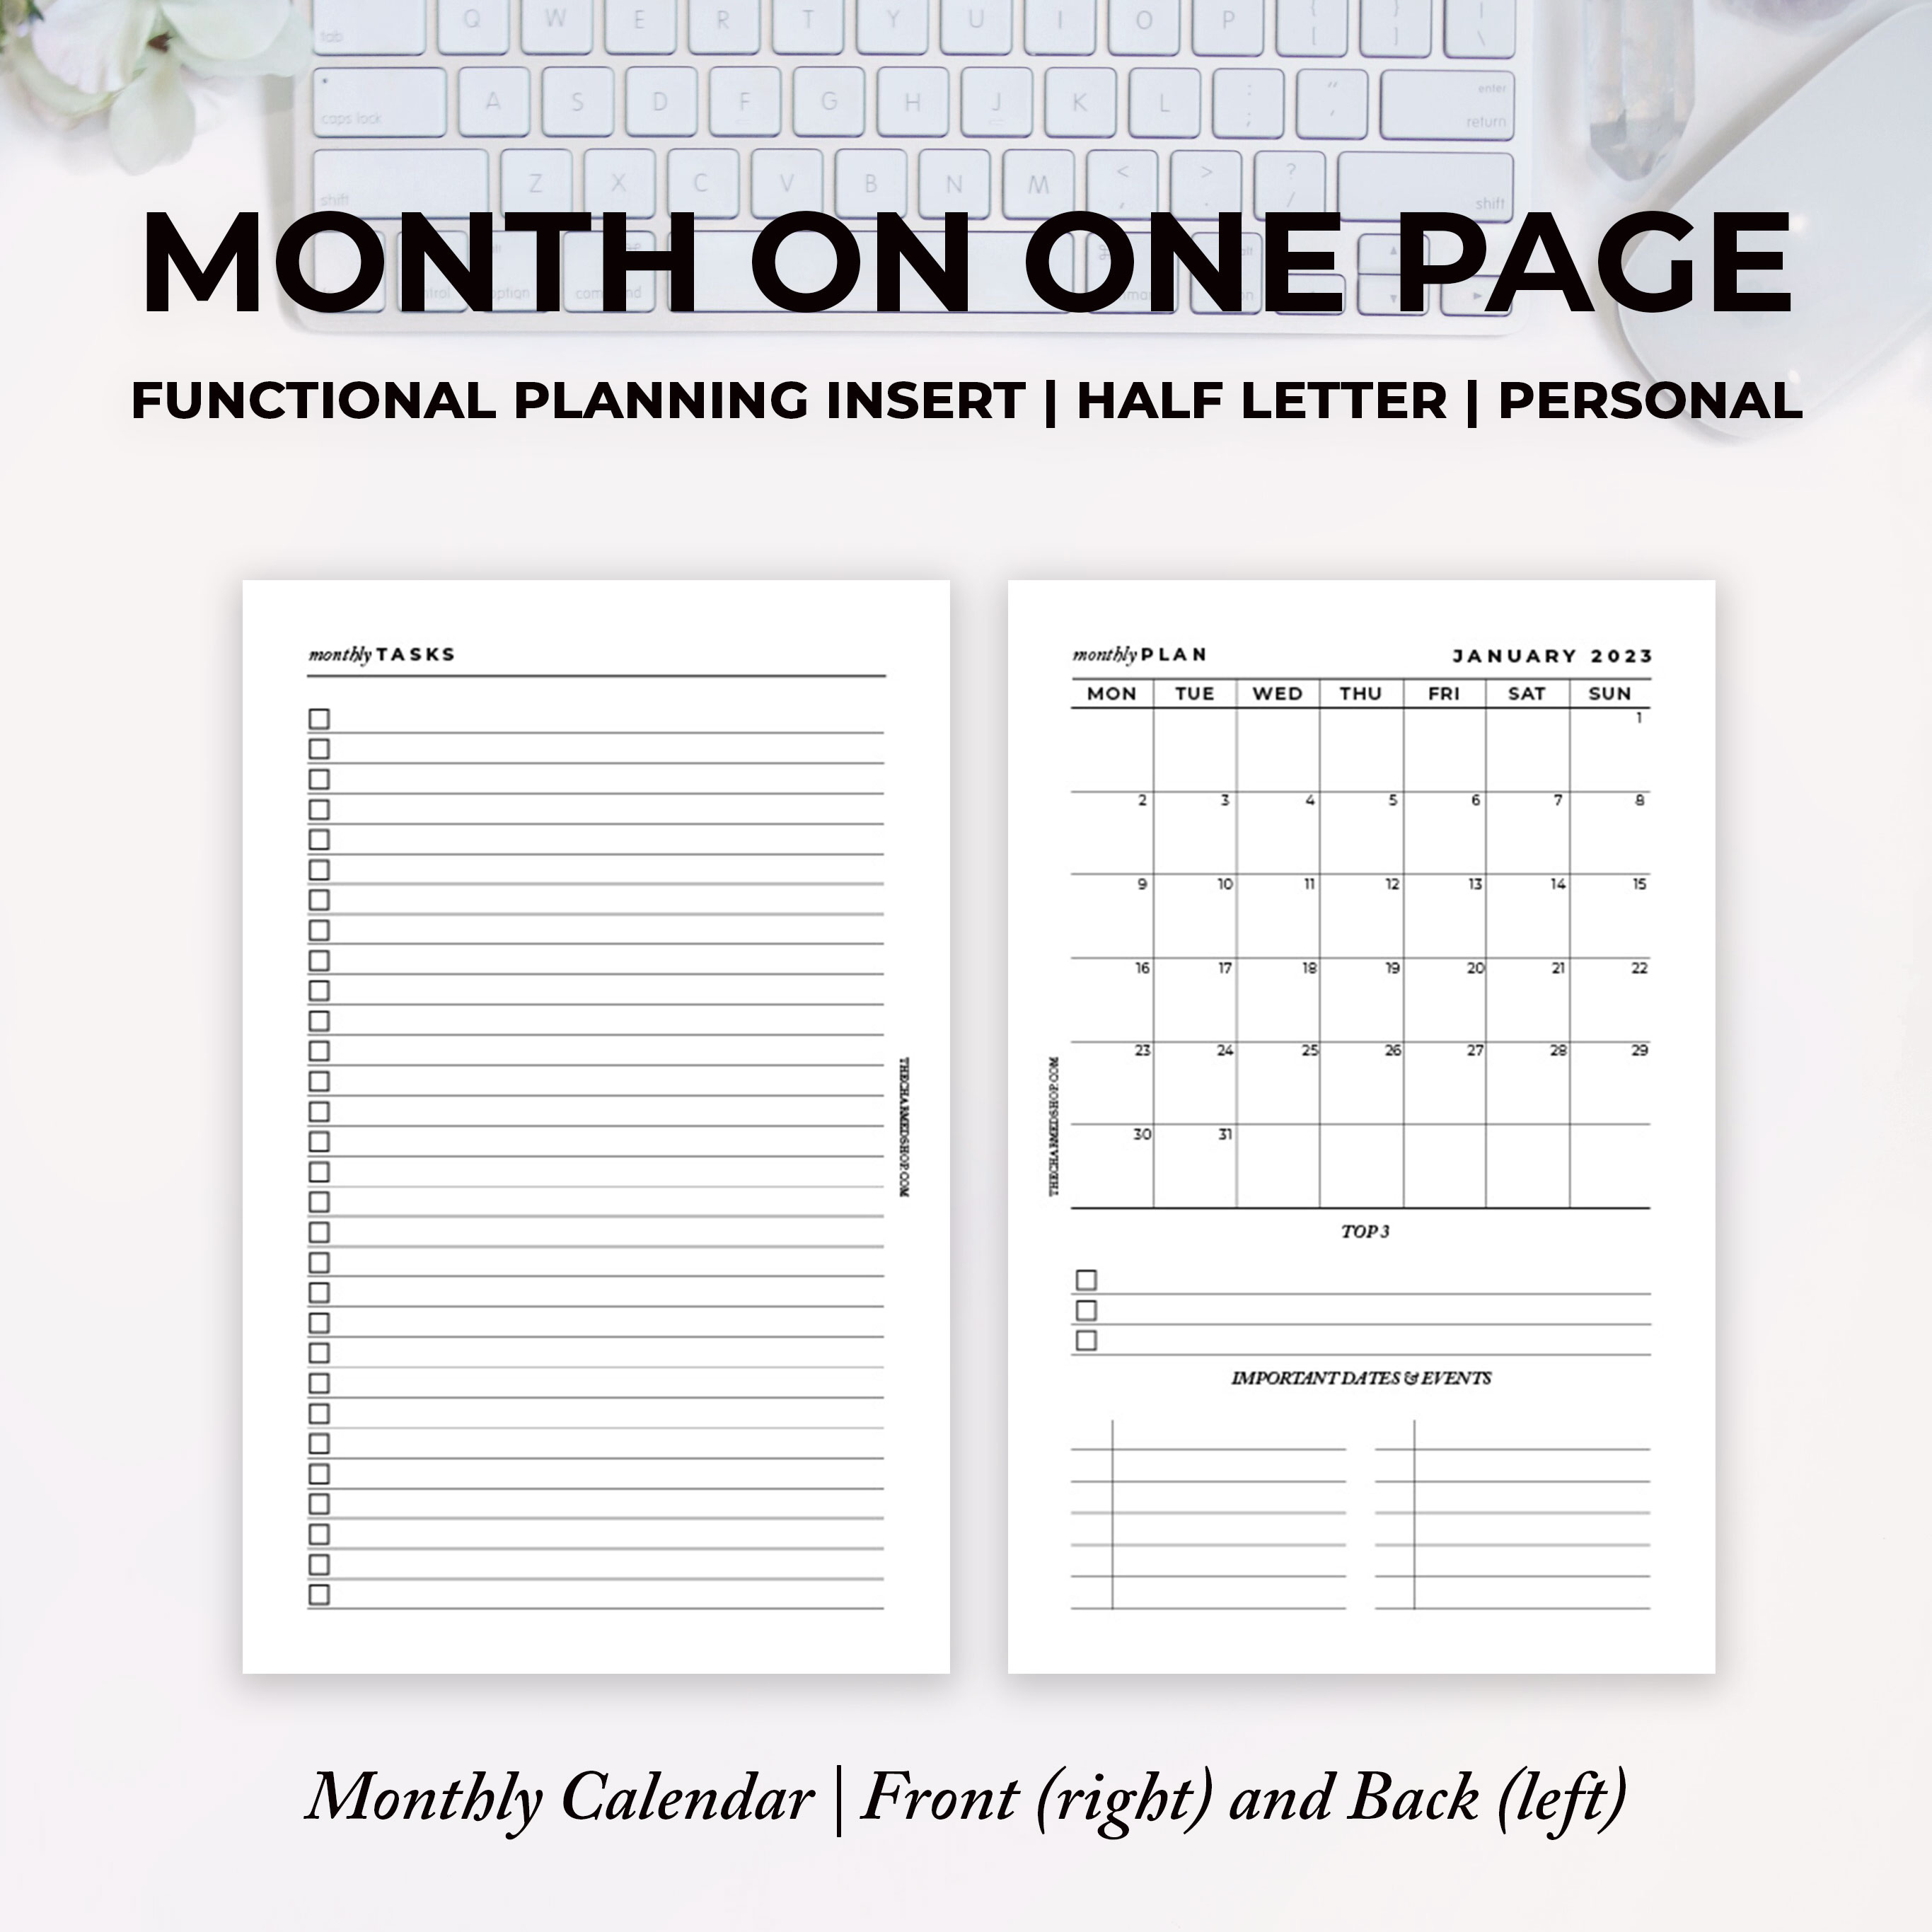 A4 & Letter 2023 Calendar Monthly Printable Planner Schedule